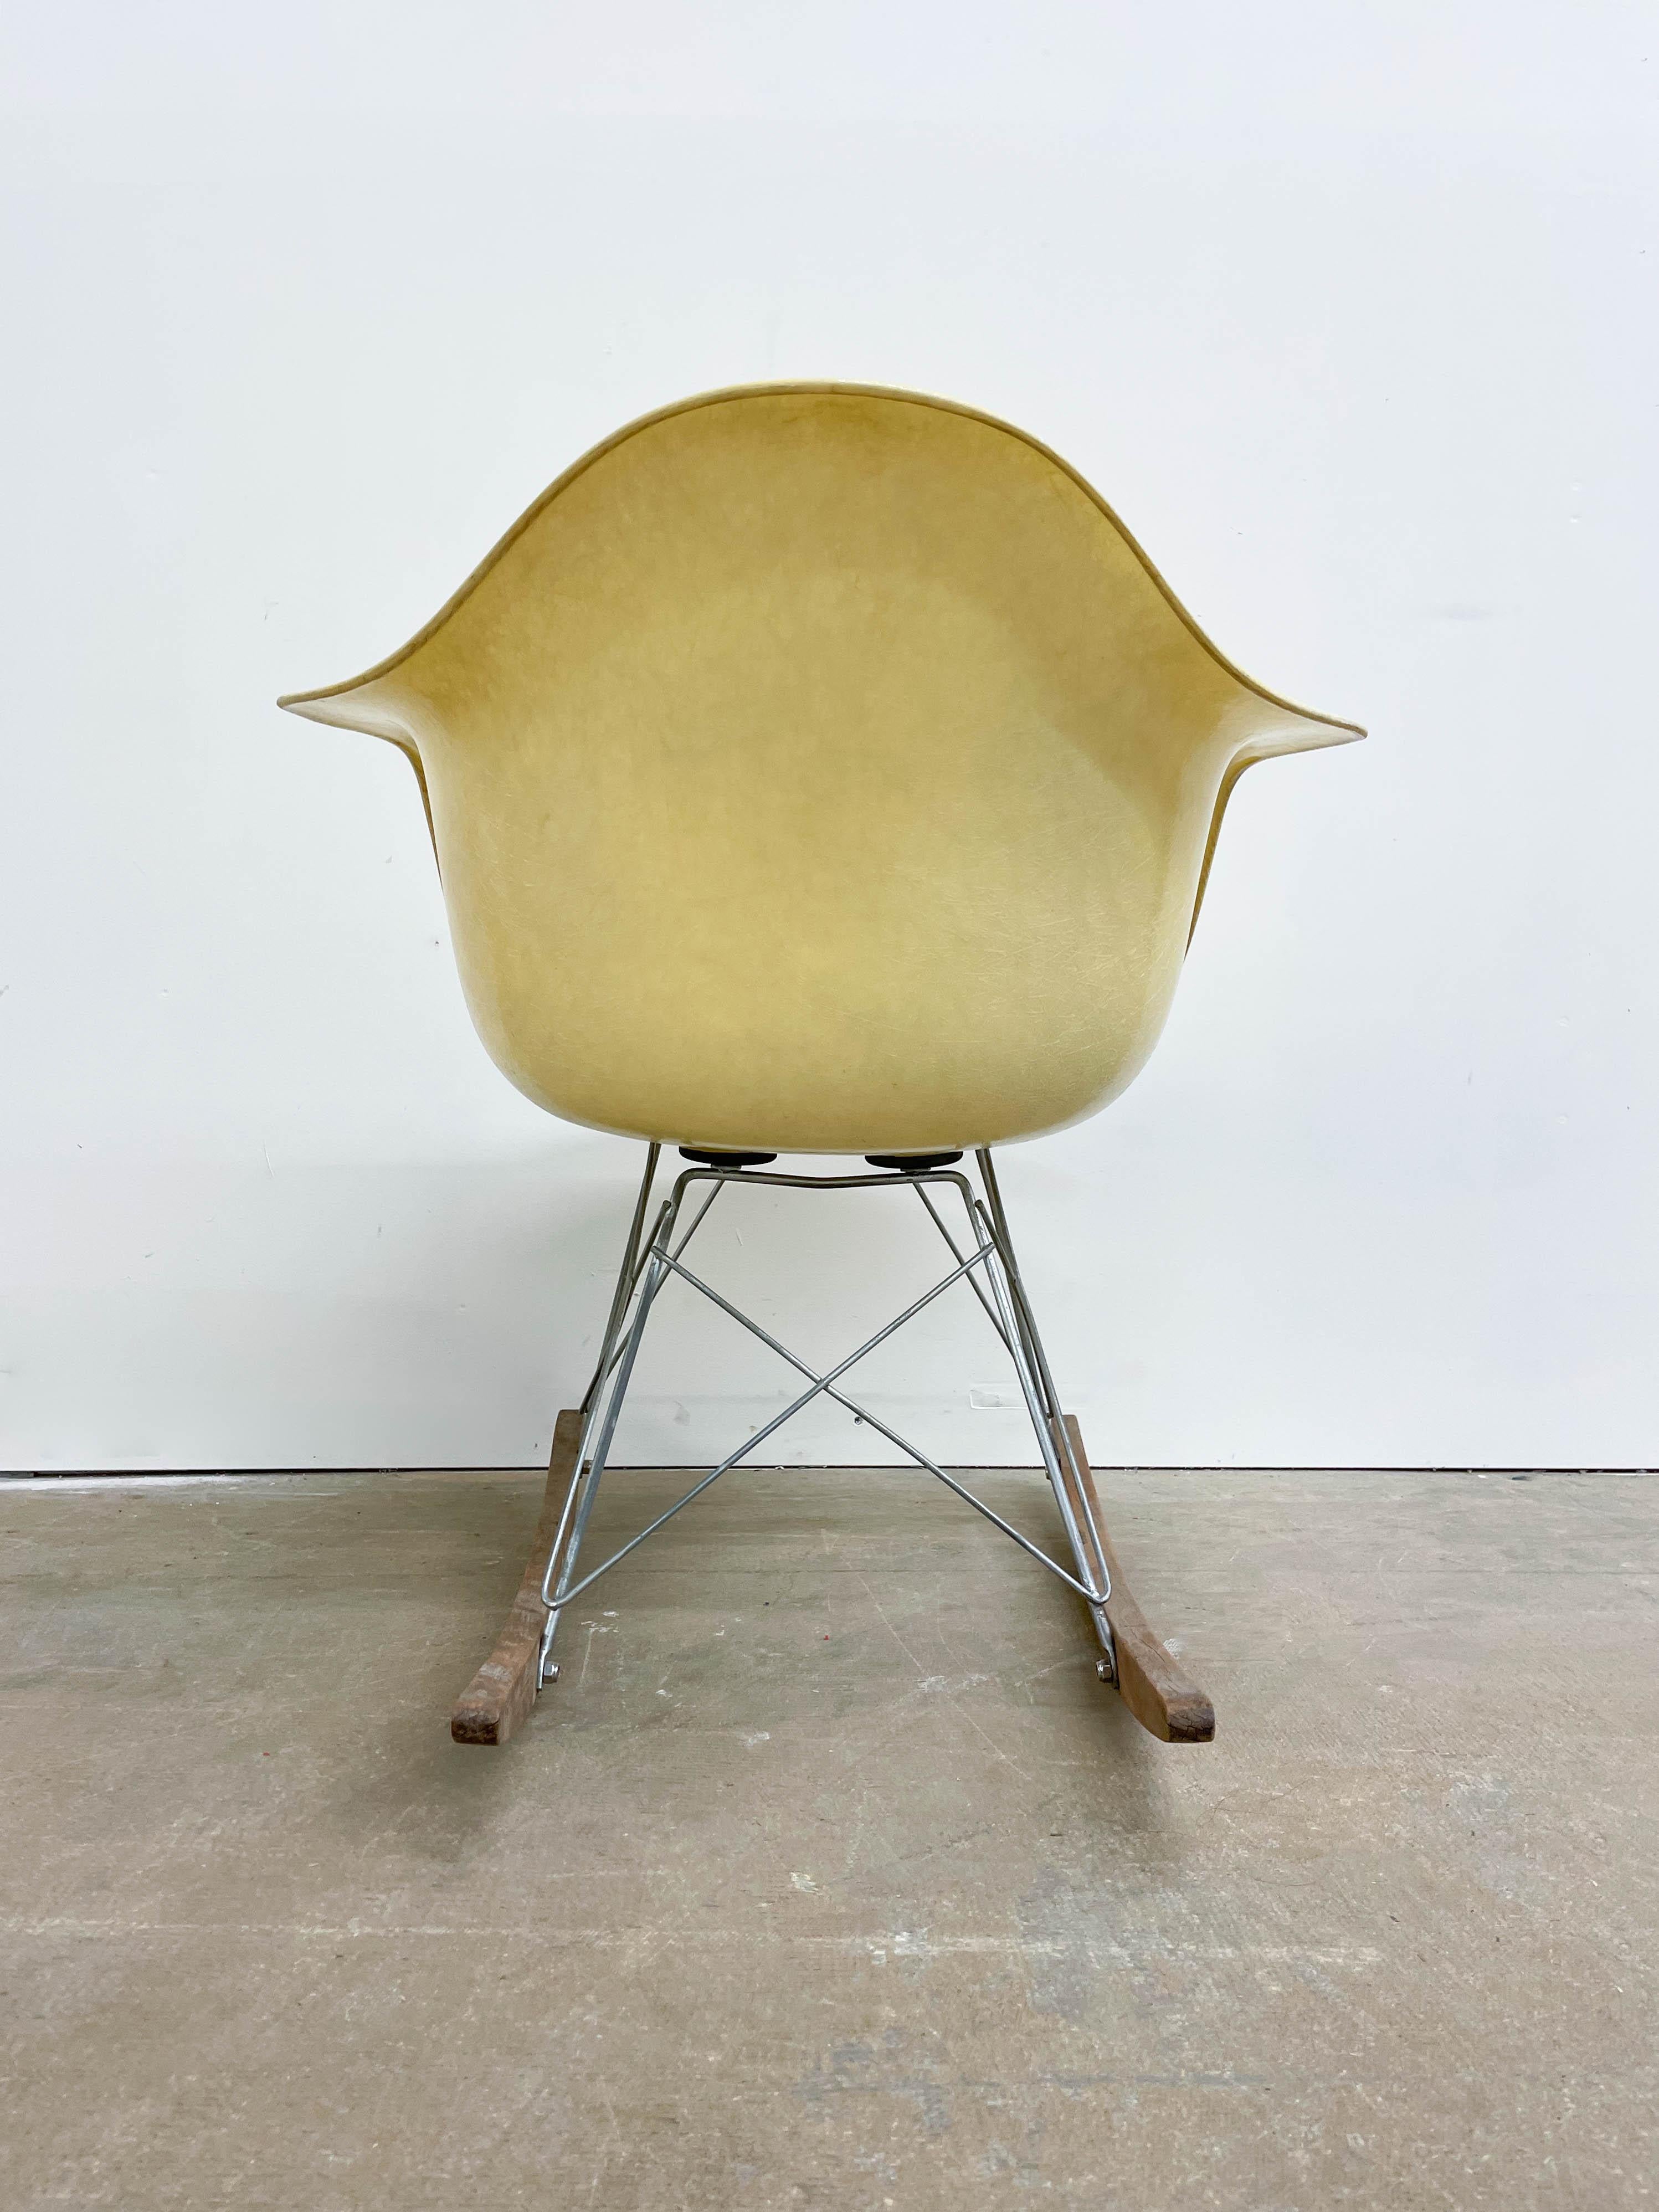 Eames Zenith RAR Rocking Chair with Rope Edge In Good Condition For Sale In Kalamazoo, MI